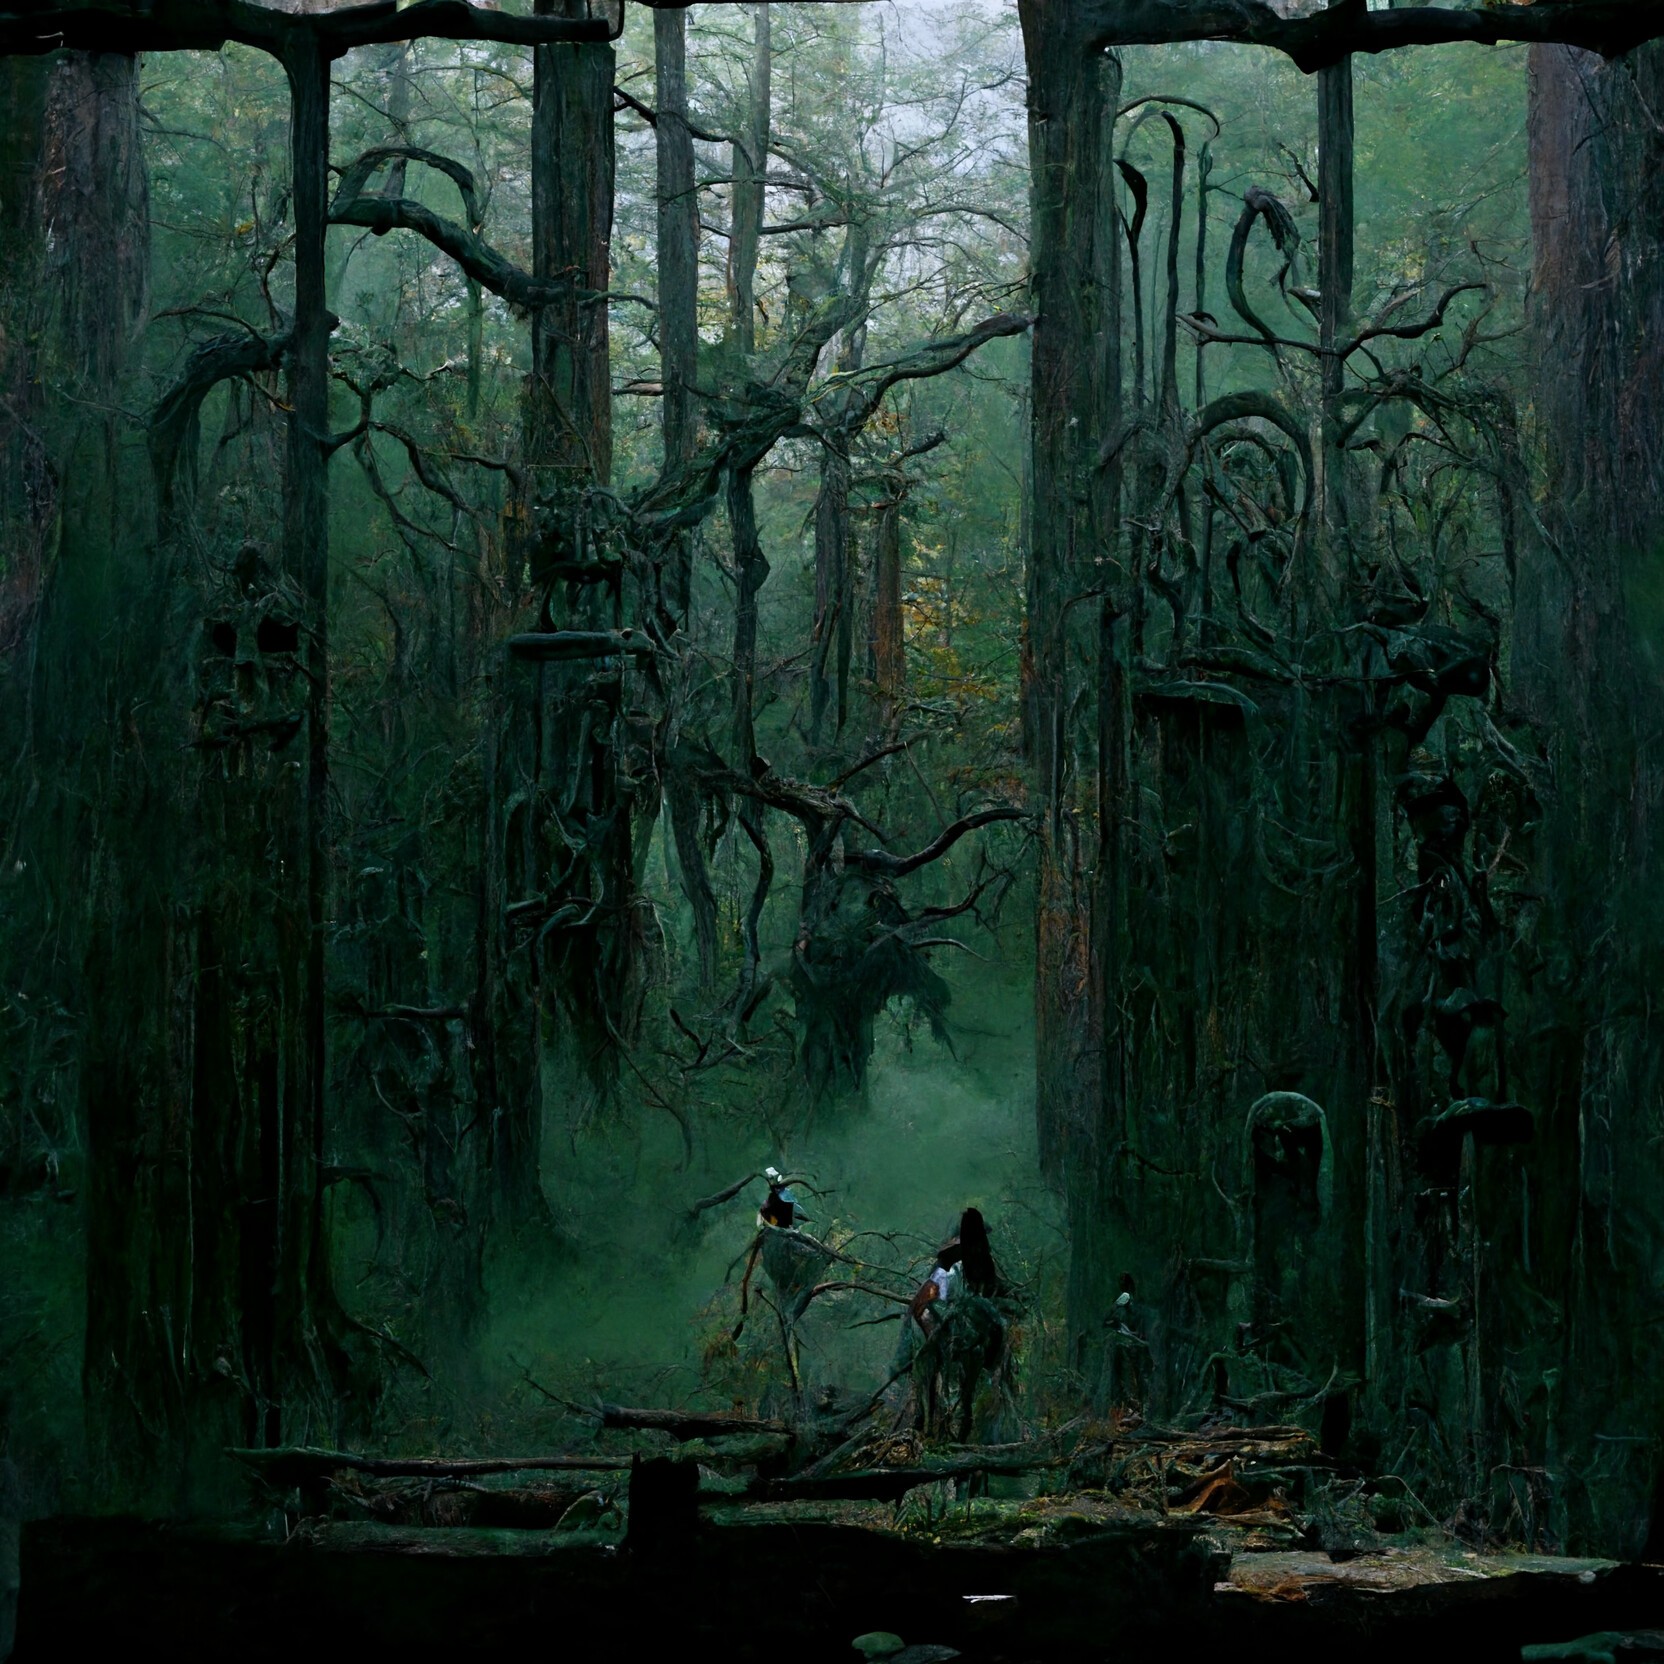 robert-wilinski-8e29ad04-1416-4300-98e2-cb8605cc9716-ro311974-very-dark-forest-massive-ancient-wooden-doors-covered-with-mos...